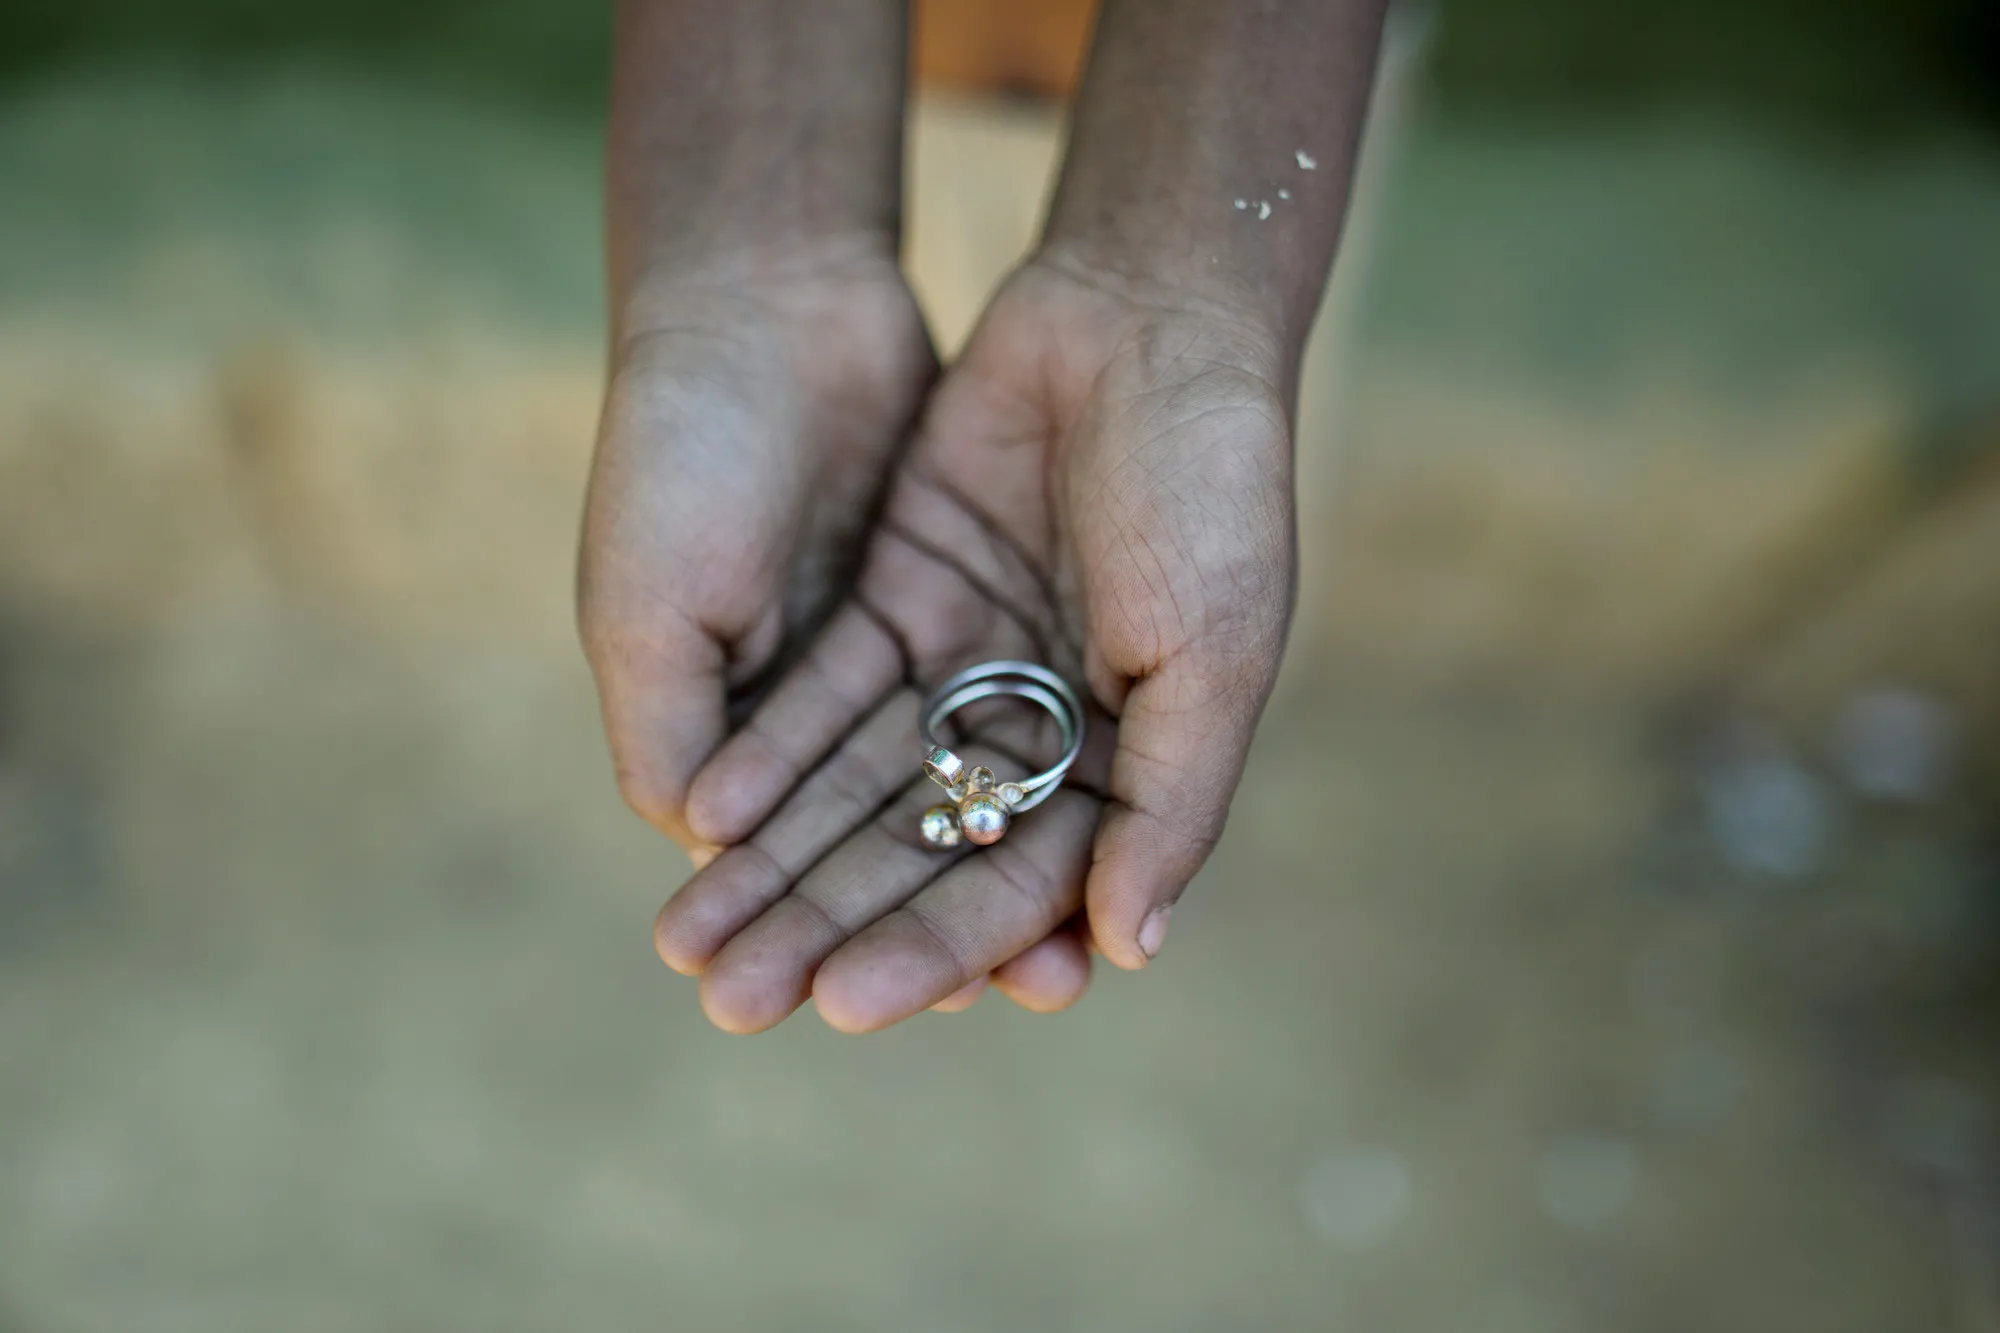 Jasia is happy. She found a lost ring. But she doesn’t want to be married anytime soon.